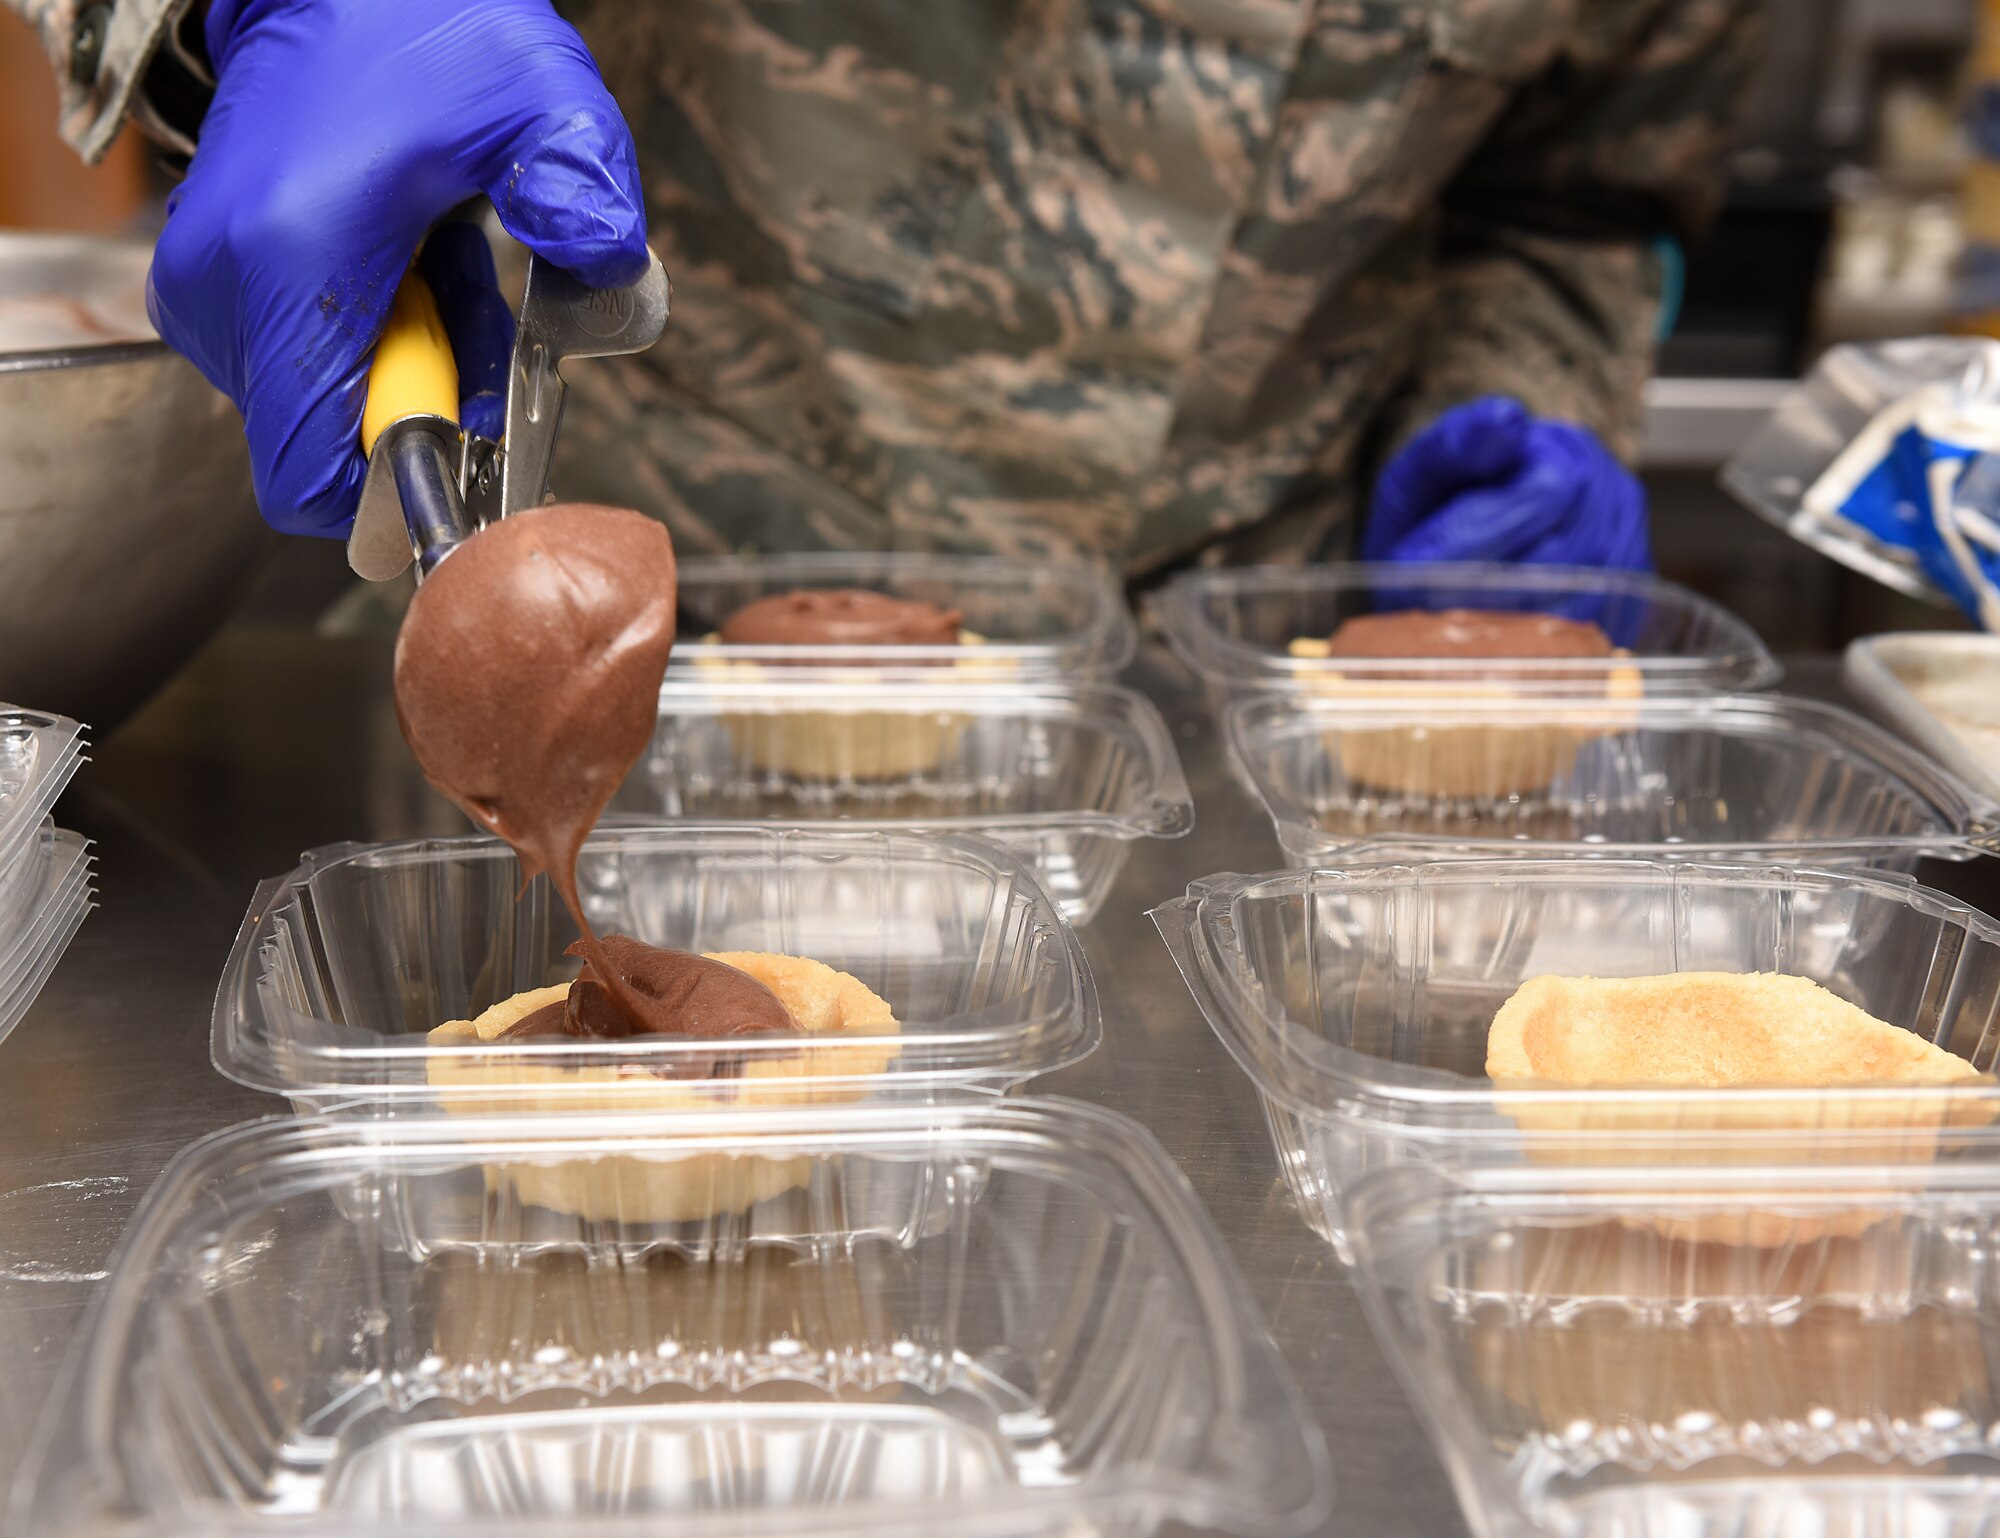 Airman 1st Class Alexis M. Taylor scoops chocolate pudding into pie crusts.